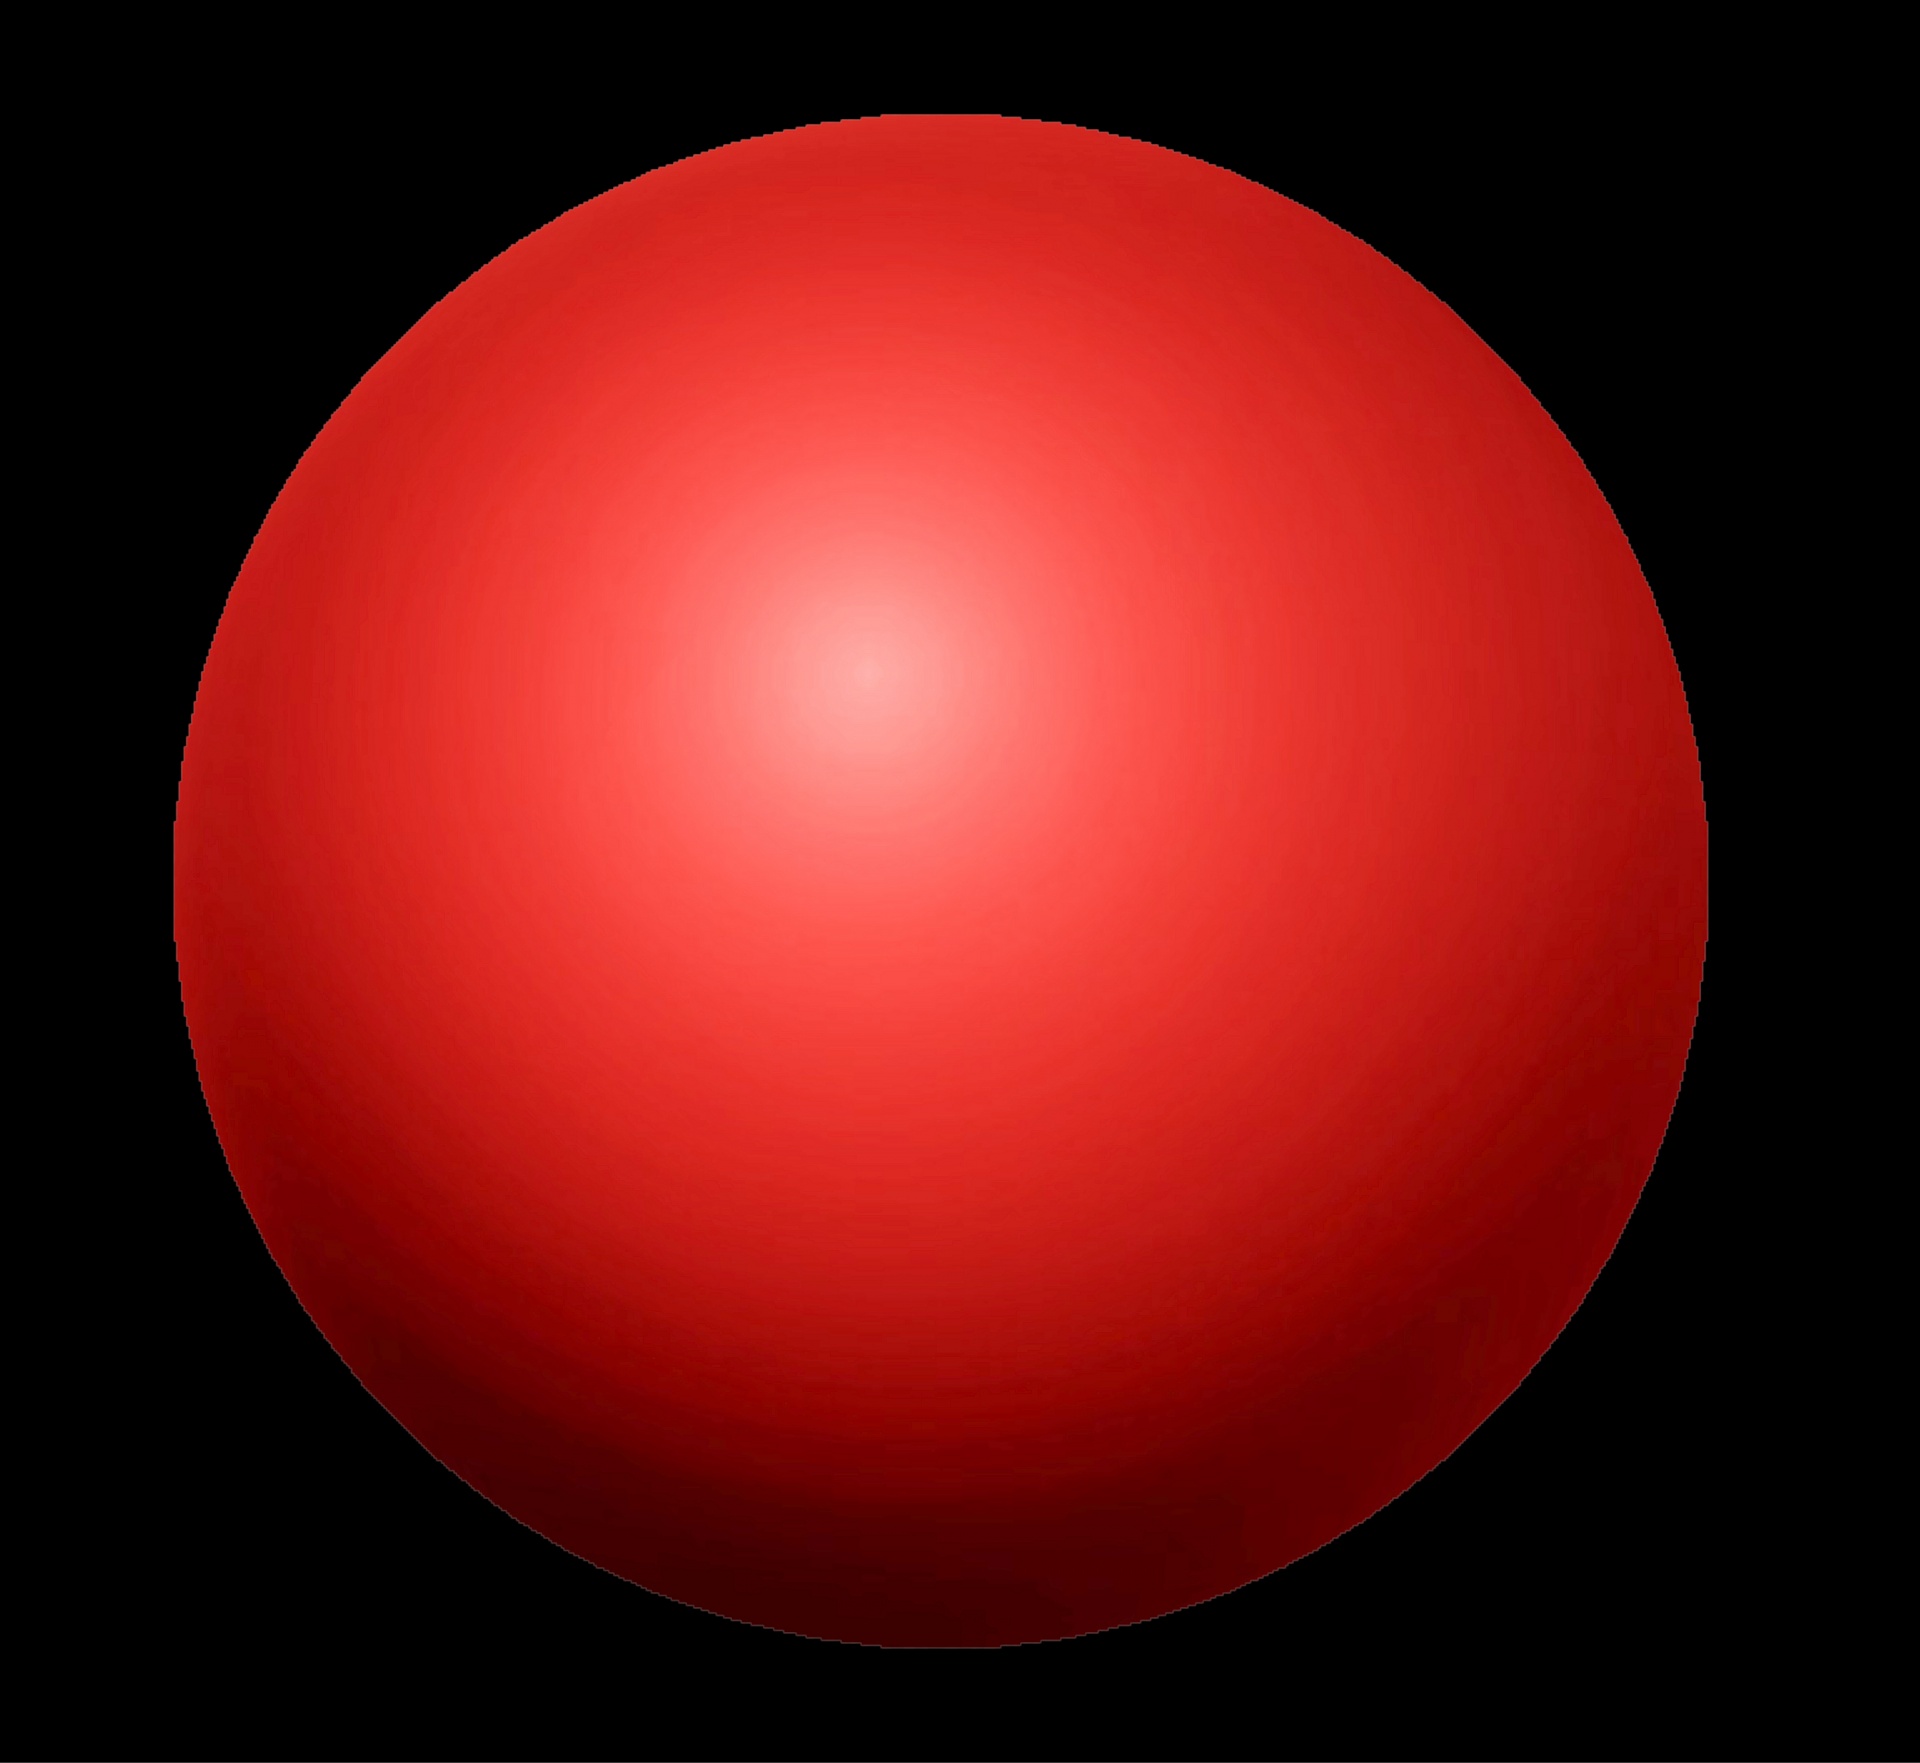 3d,red,ball,sphere,isolated,black,background,icon,red ball,free pictures, f...